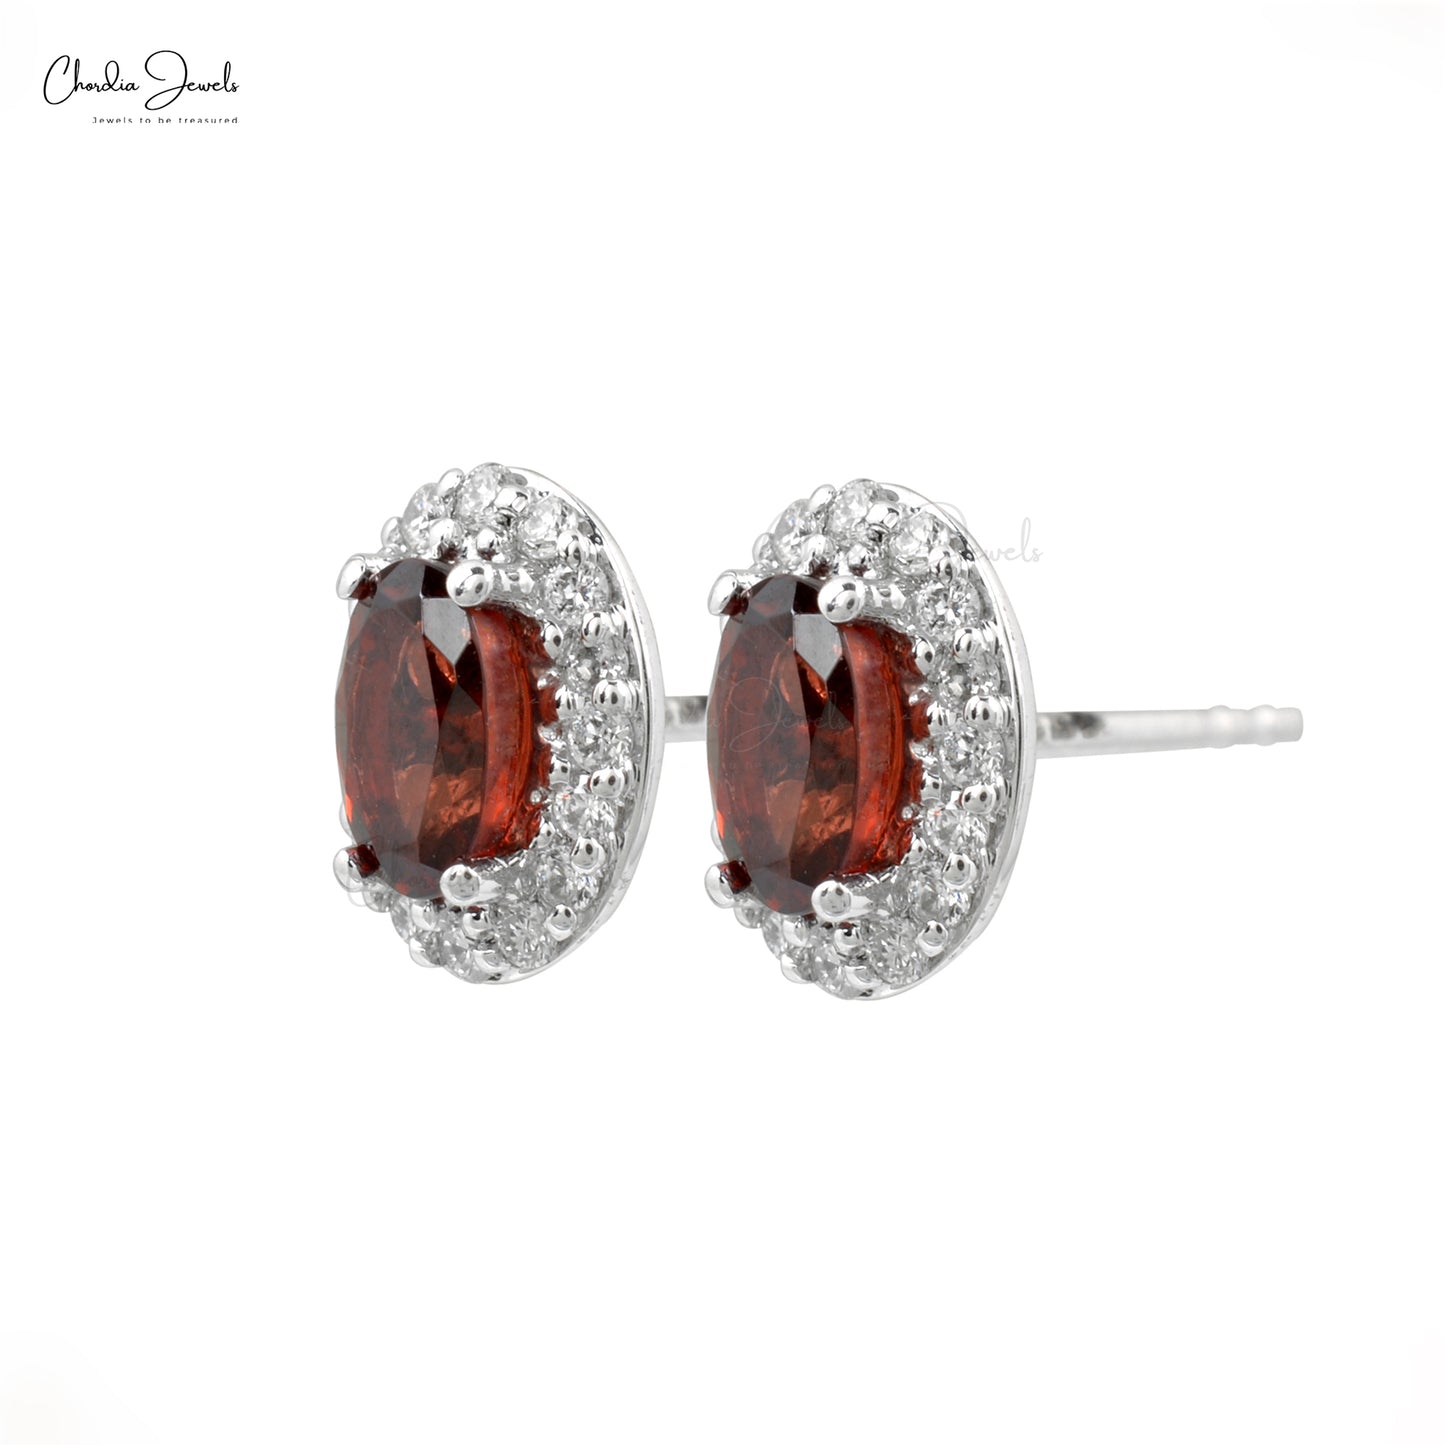 Load image into Gallery viewer, Natural Garnet Earrings 5x3mm Oval Cut Gemstone Earrings 14k Solid Gold Halo Earrings For Her
